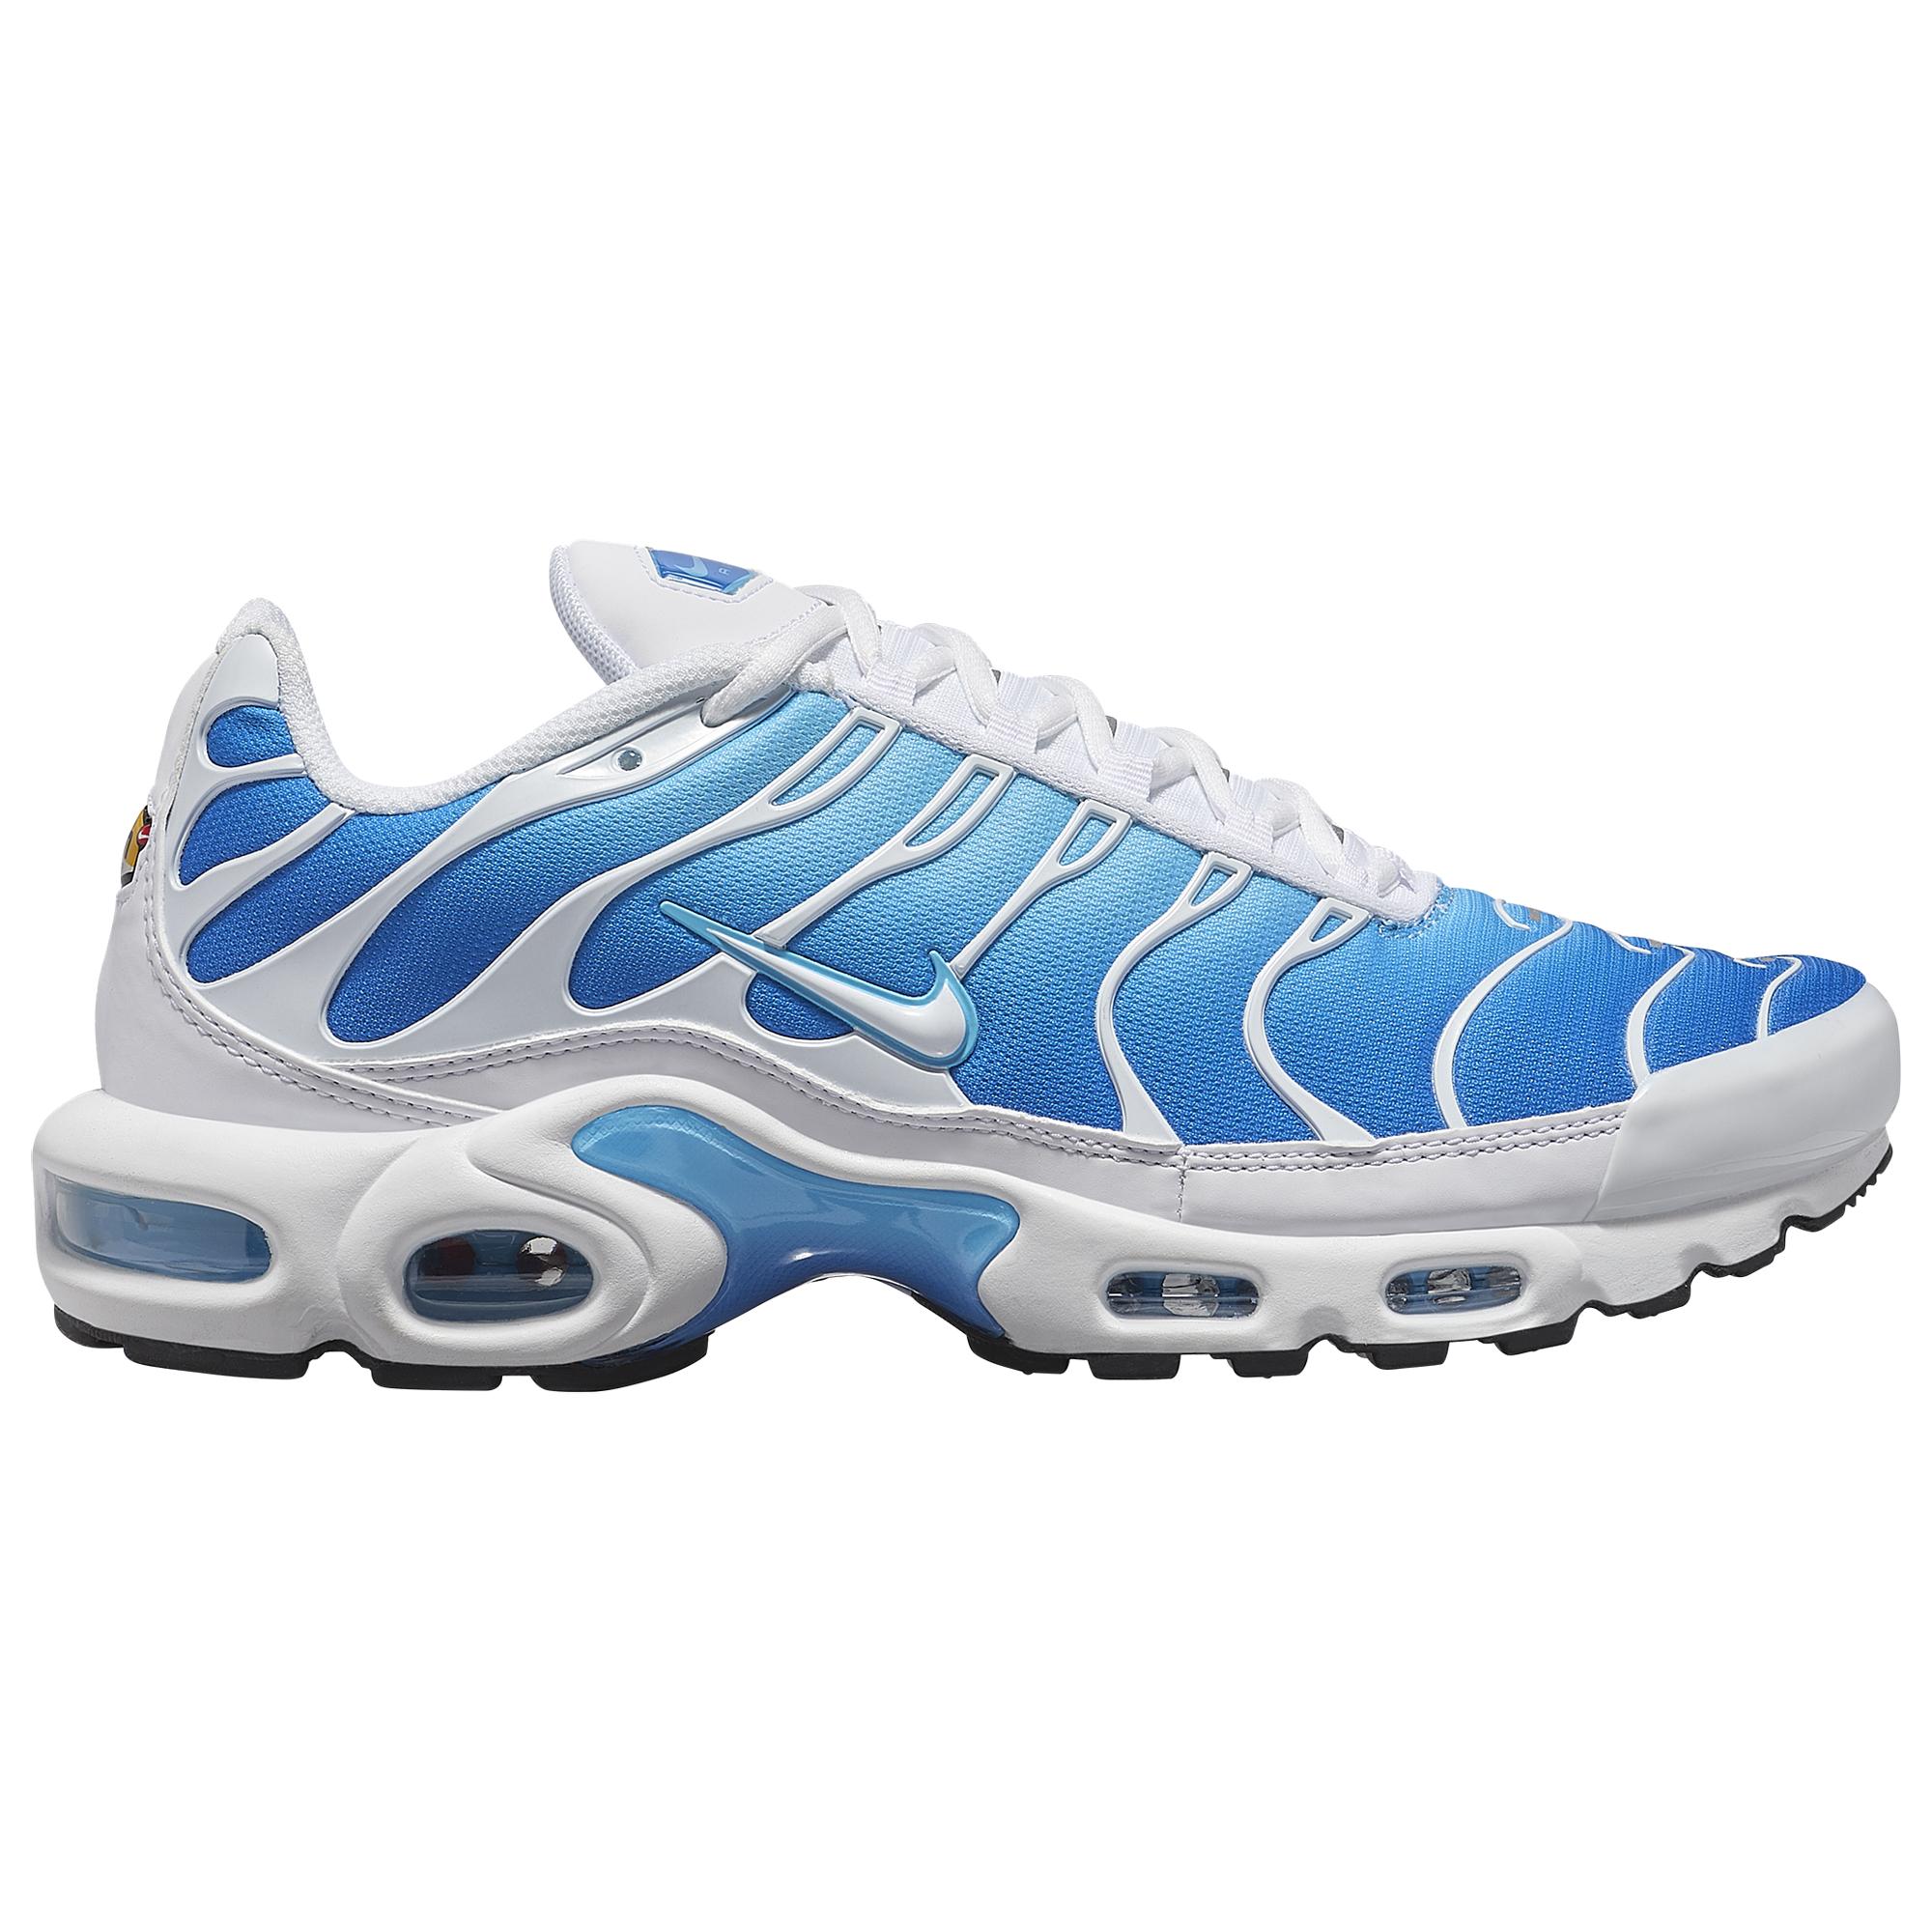 Nike Leather Air Max Plus Running Shoes in Blue for Men - Lyst